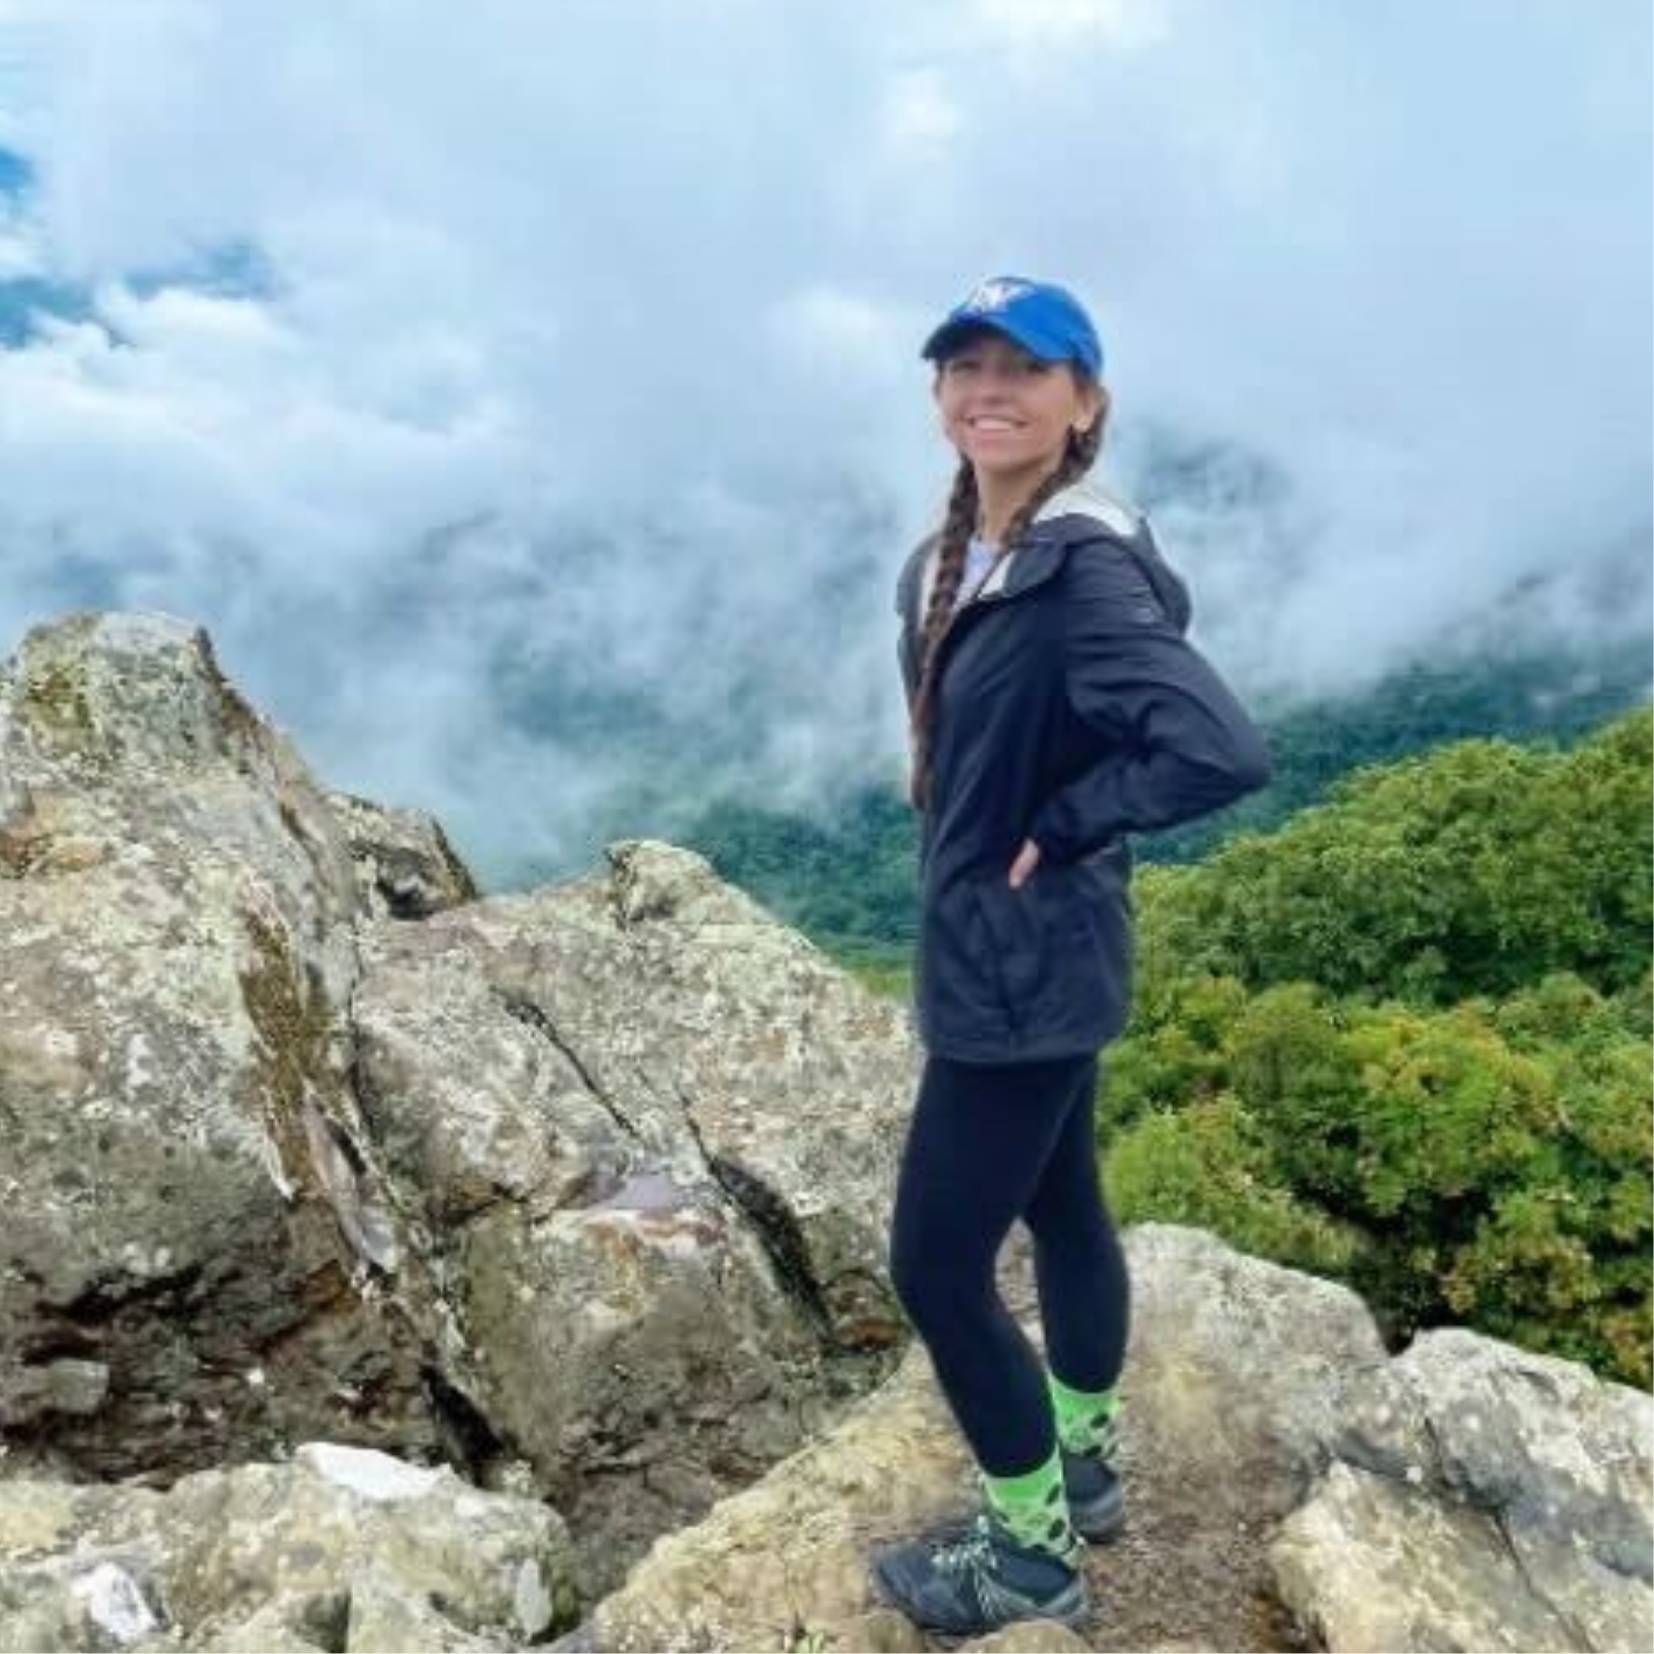 Image of female standing on top of large rocks overlooking a cloudy, tree filled valley.